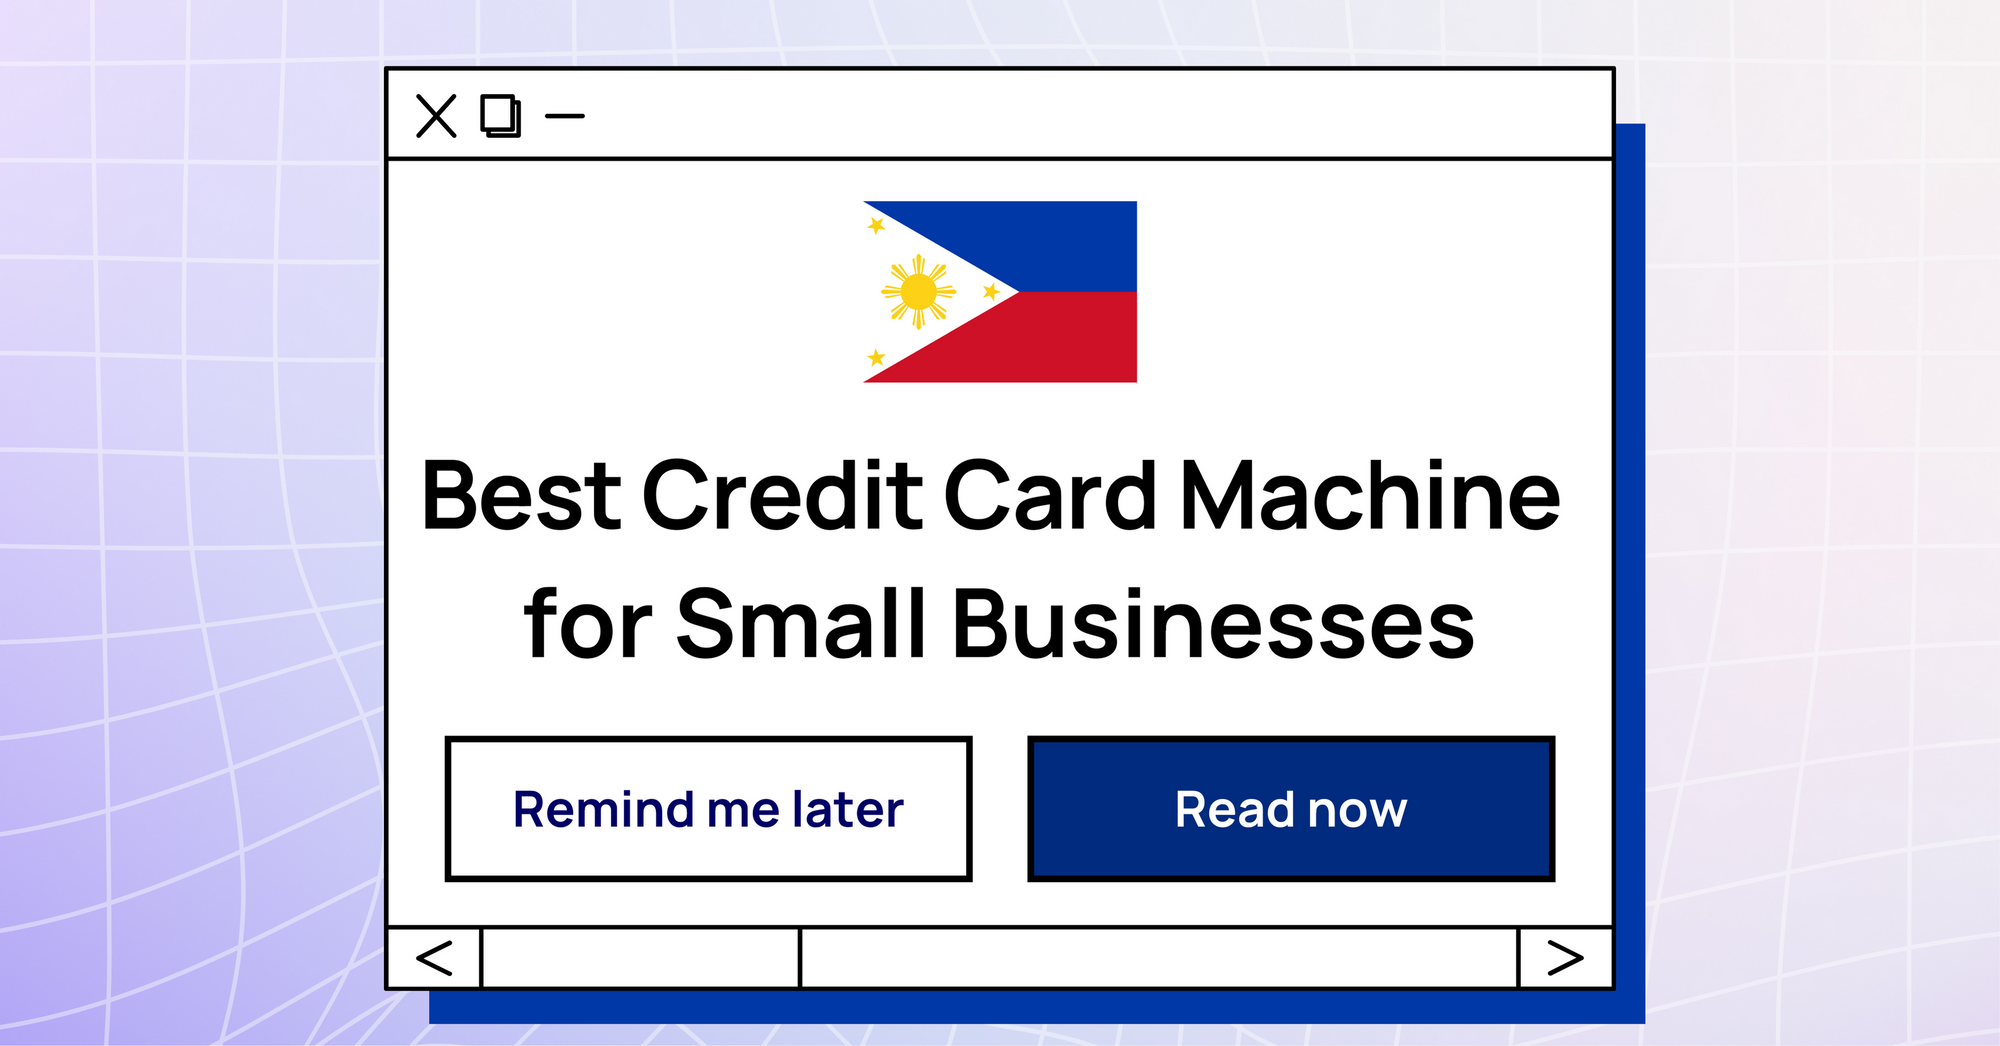 Best Credit Card Machine for Small Businesses in the Philippines